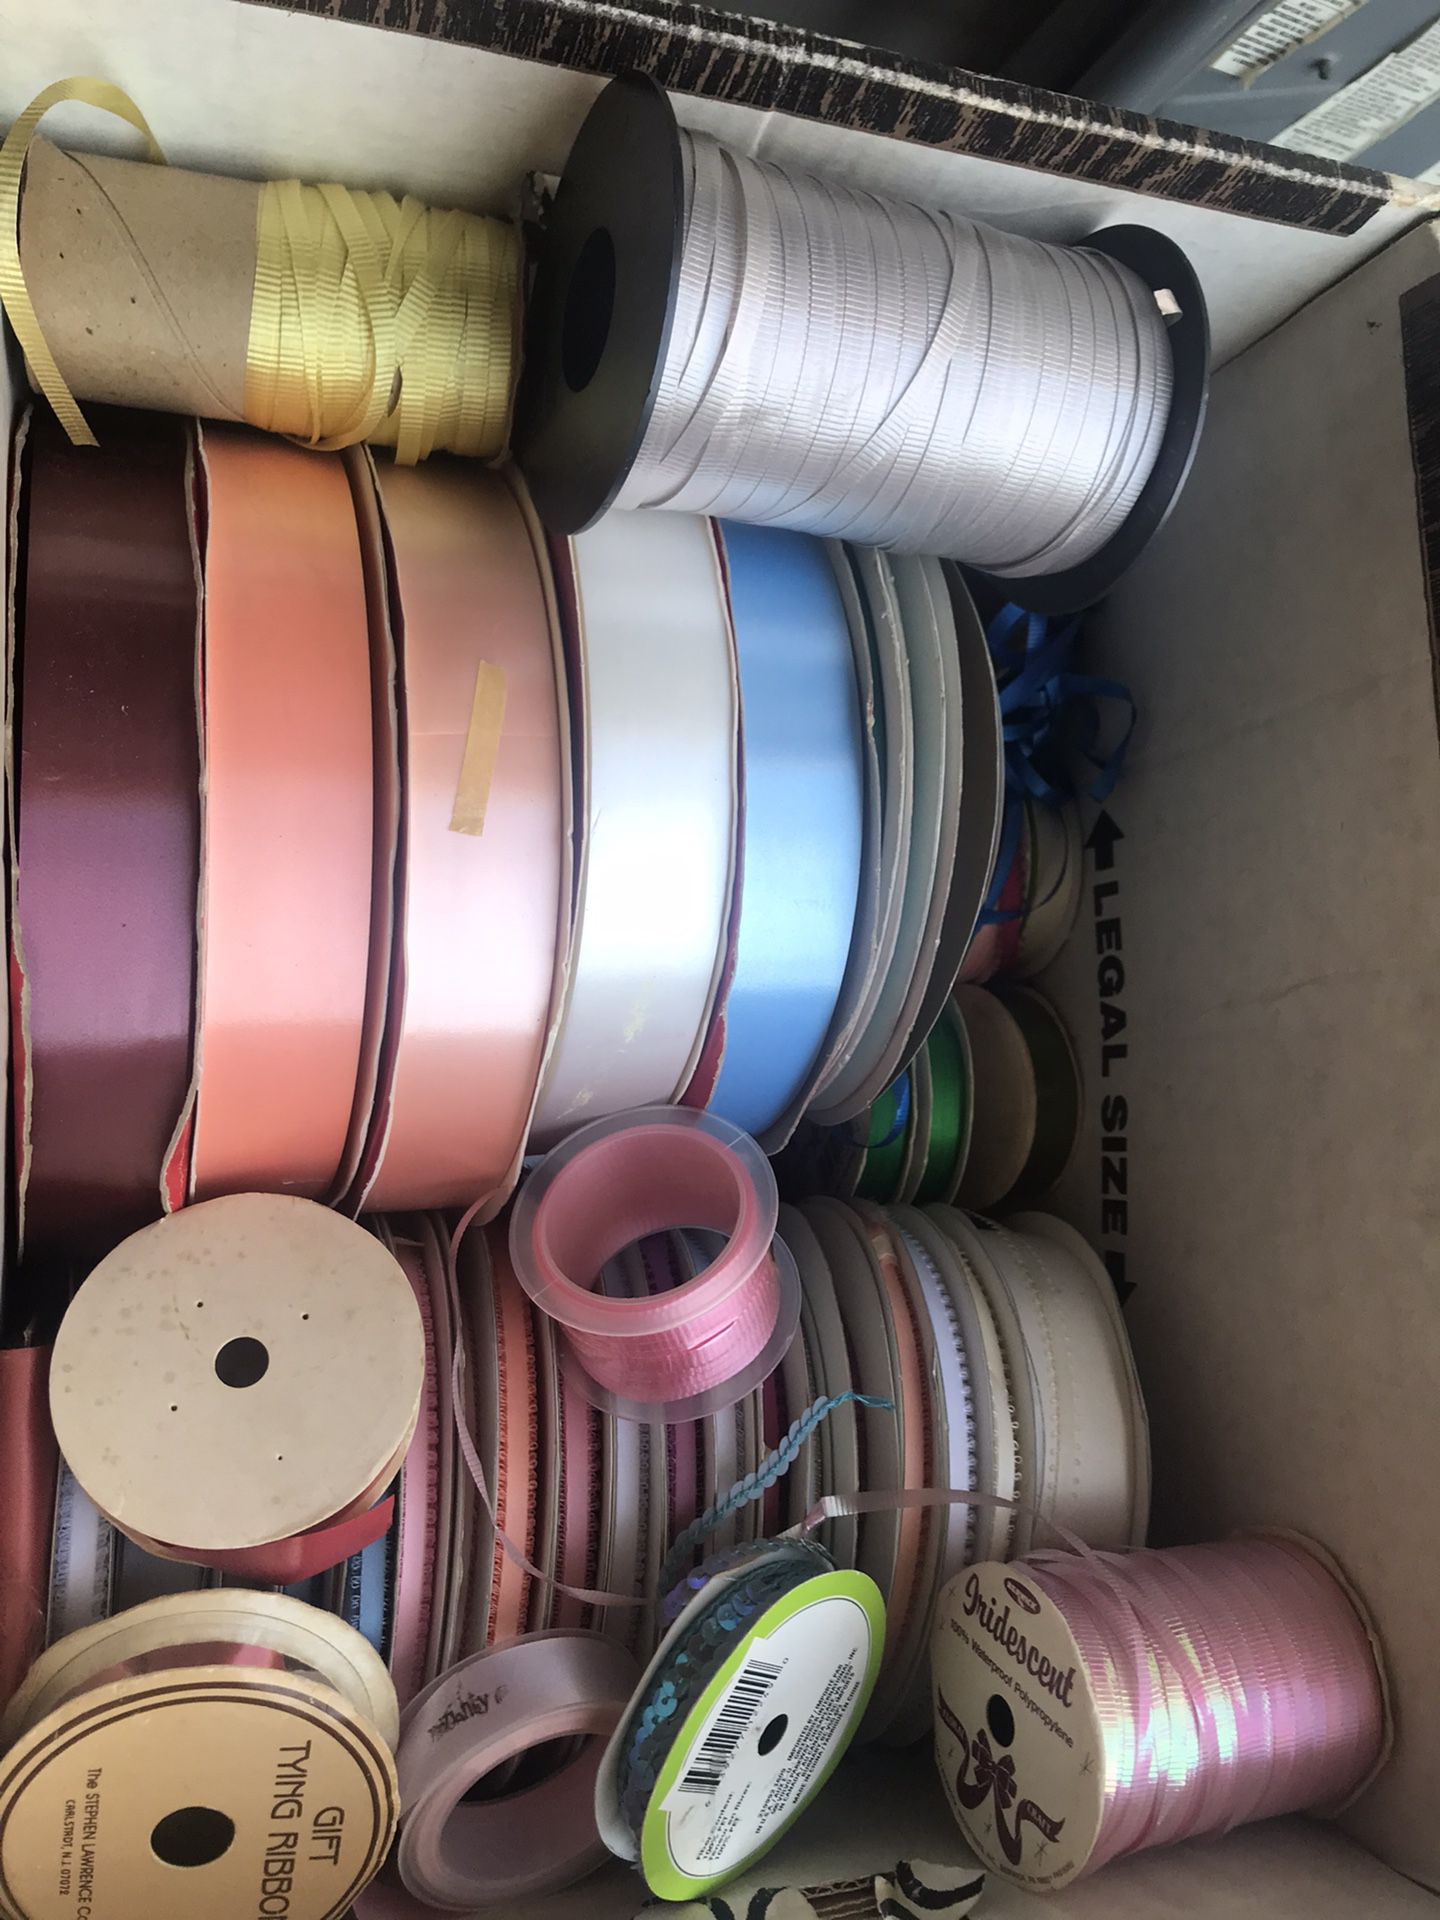 Selling Individual Or Box/boxes Of Arts And Craft Materials- Ribbons, Laces, Tulle, And Much More